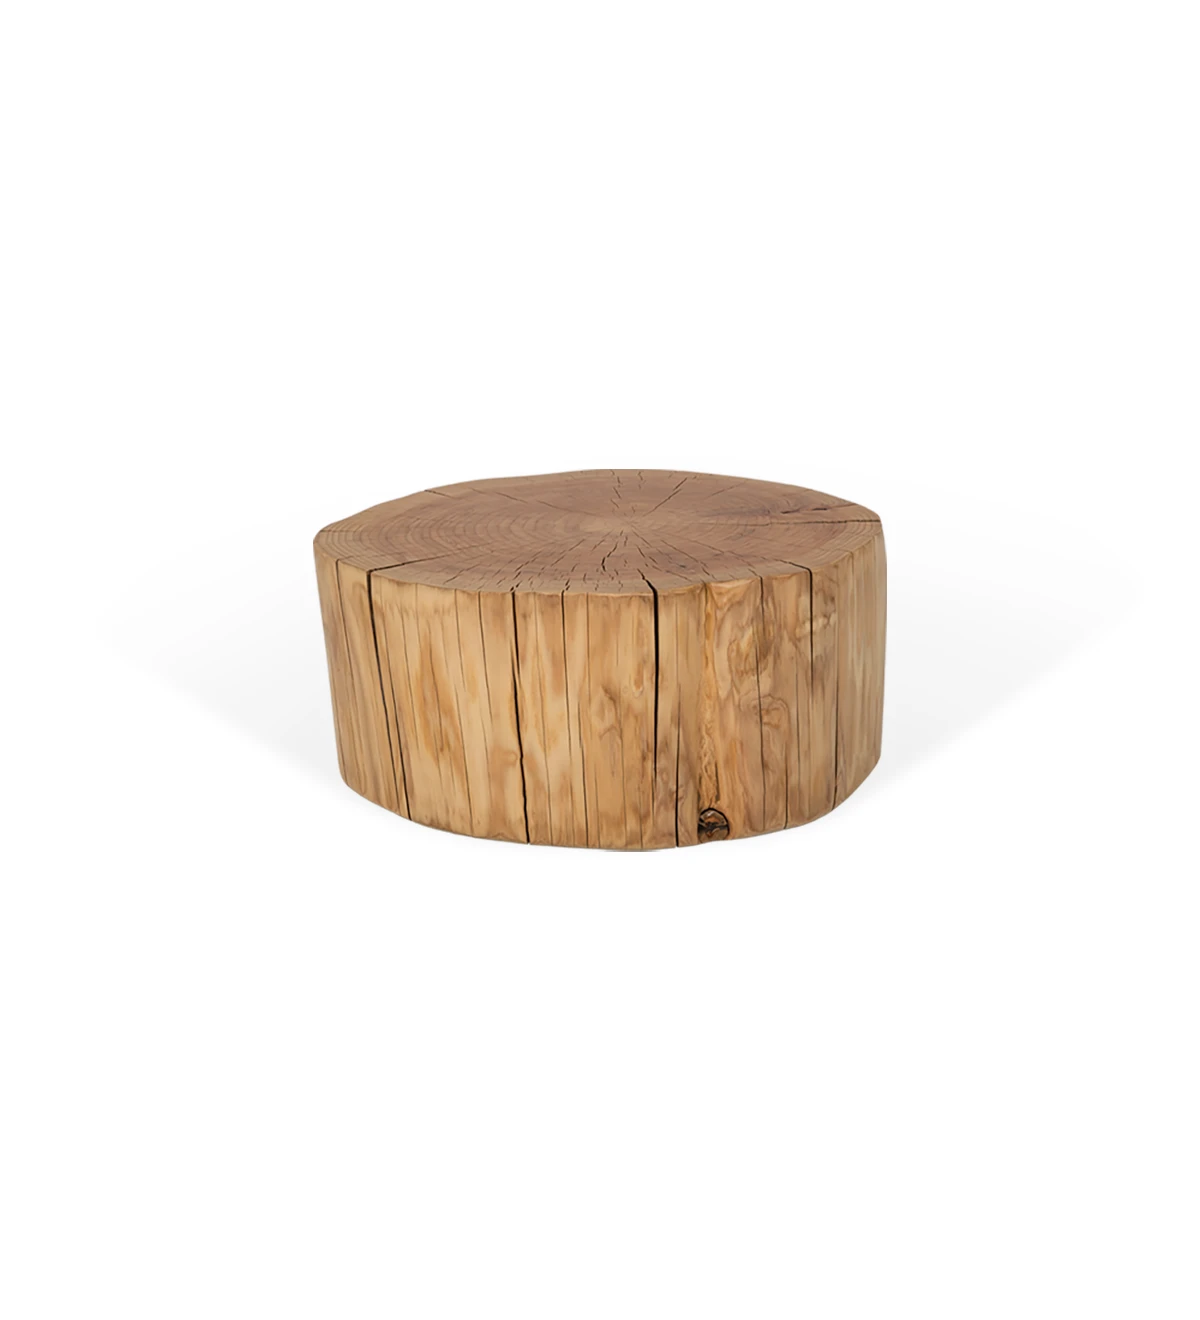 Medium trunk coffee table in natural cryptomeria wood